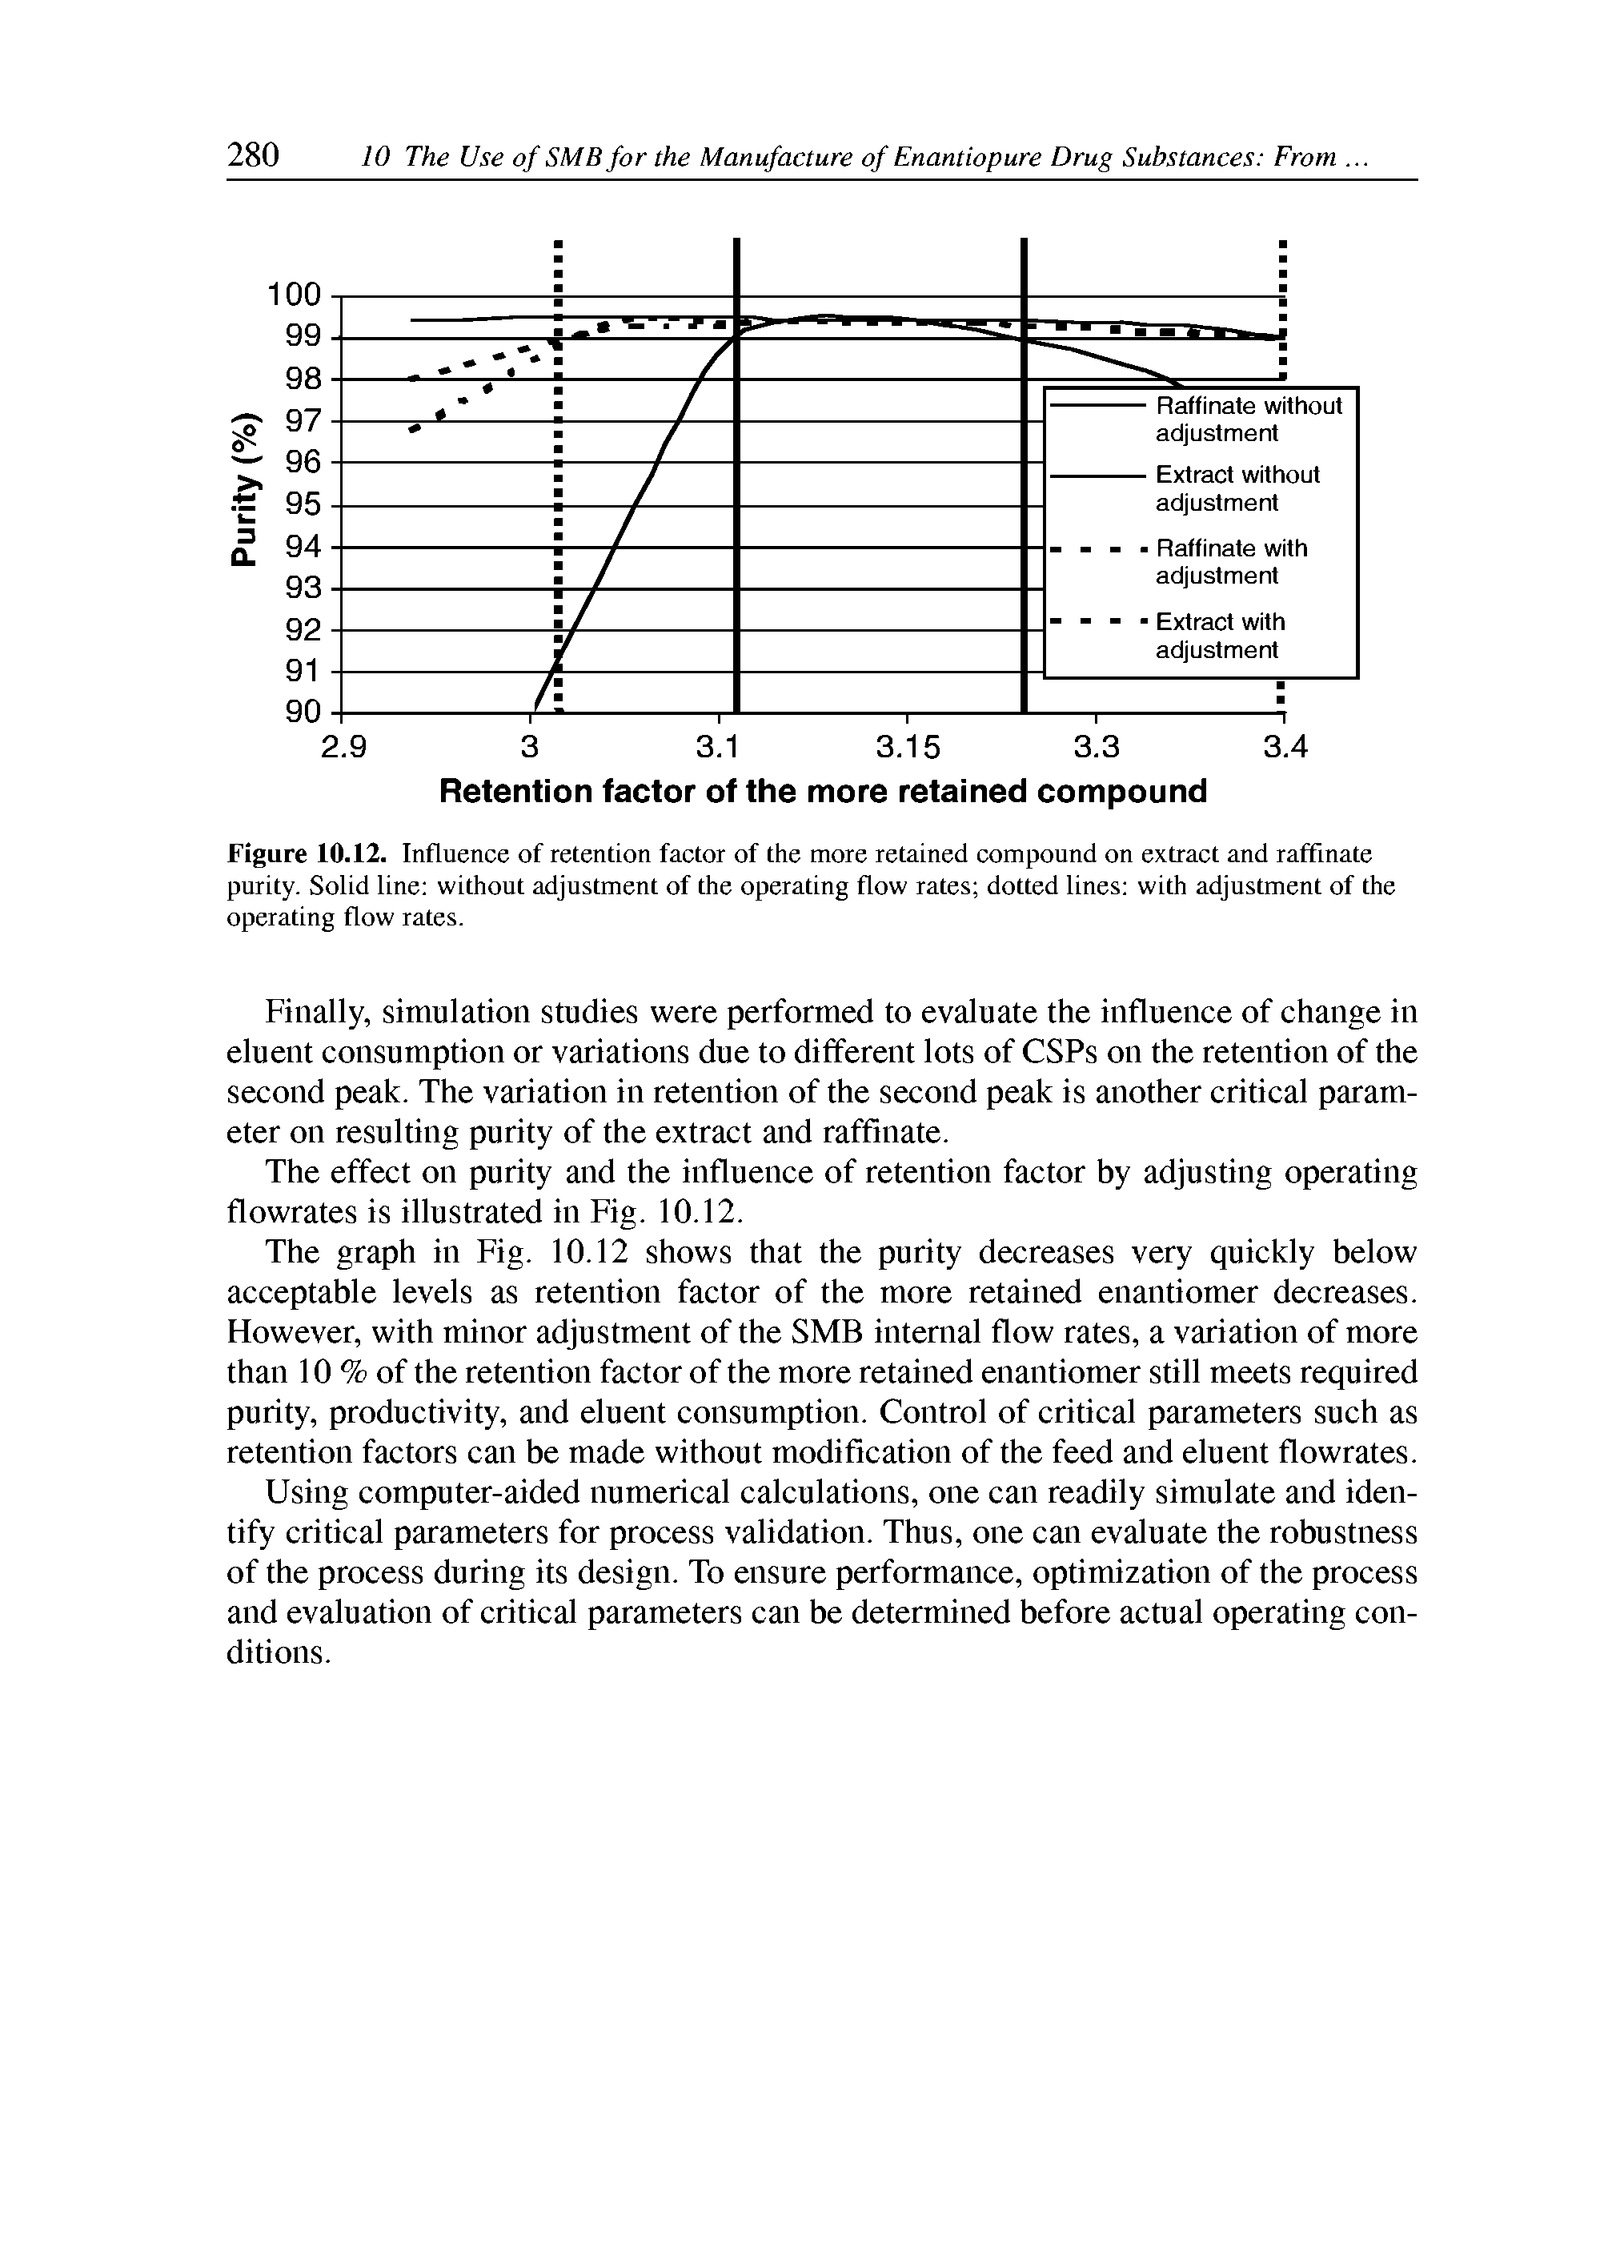 Figure 10.12. Influence of retention factor of the more retained compound on extract and raffinate purity. Solid line without adjustment of the operating flow rates dotted lines with adjustment of the operating flow rates.